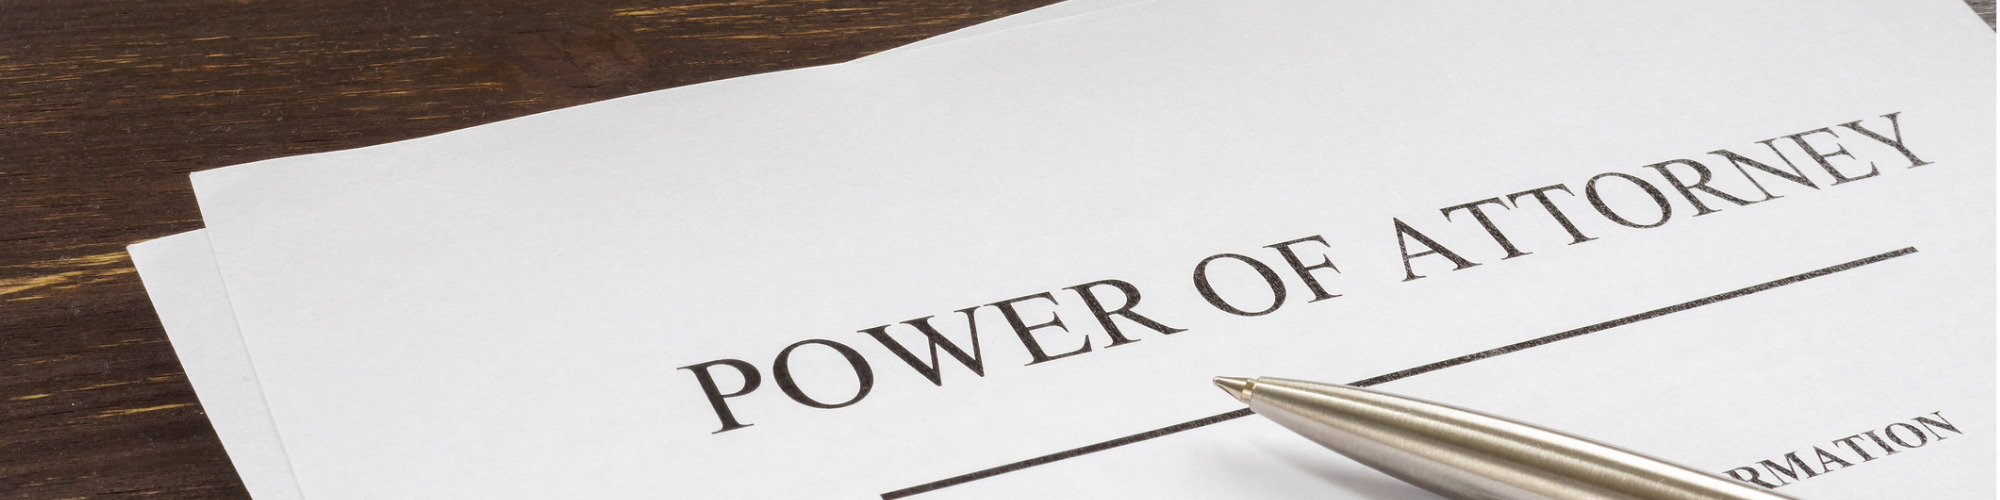 The New Powers of Attorney Act 2023 - What to Expect with Caroline Bielanska